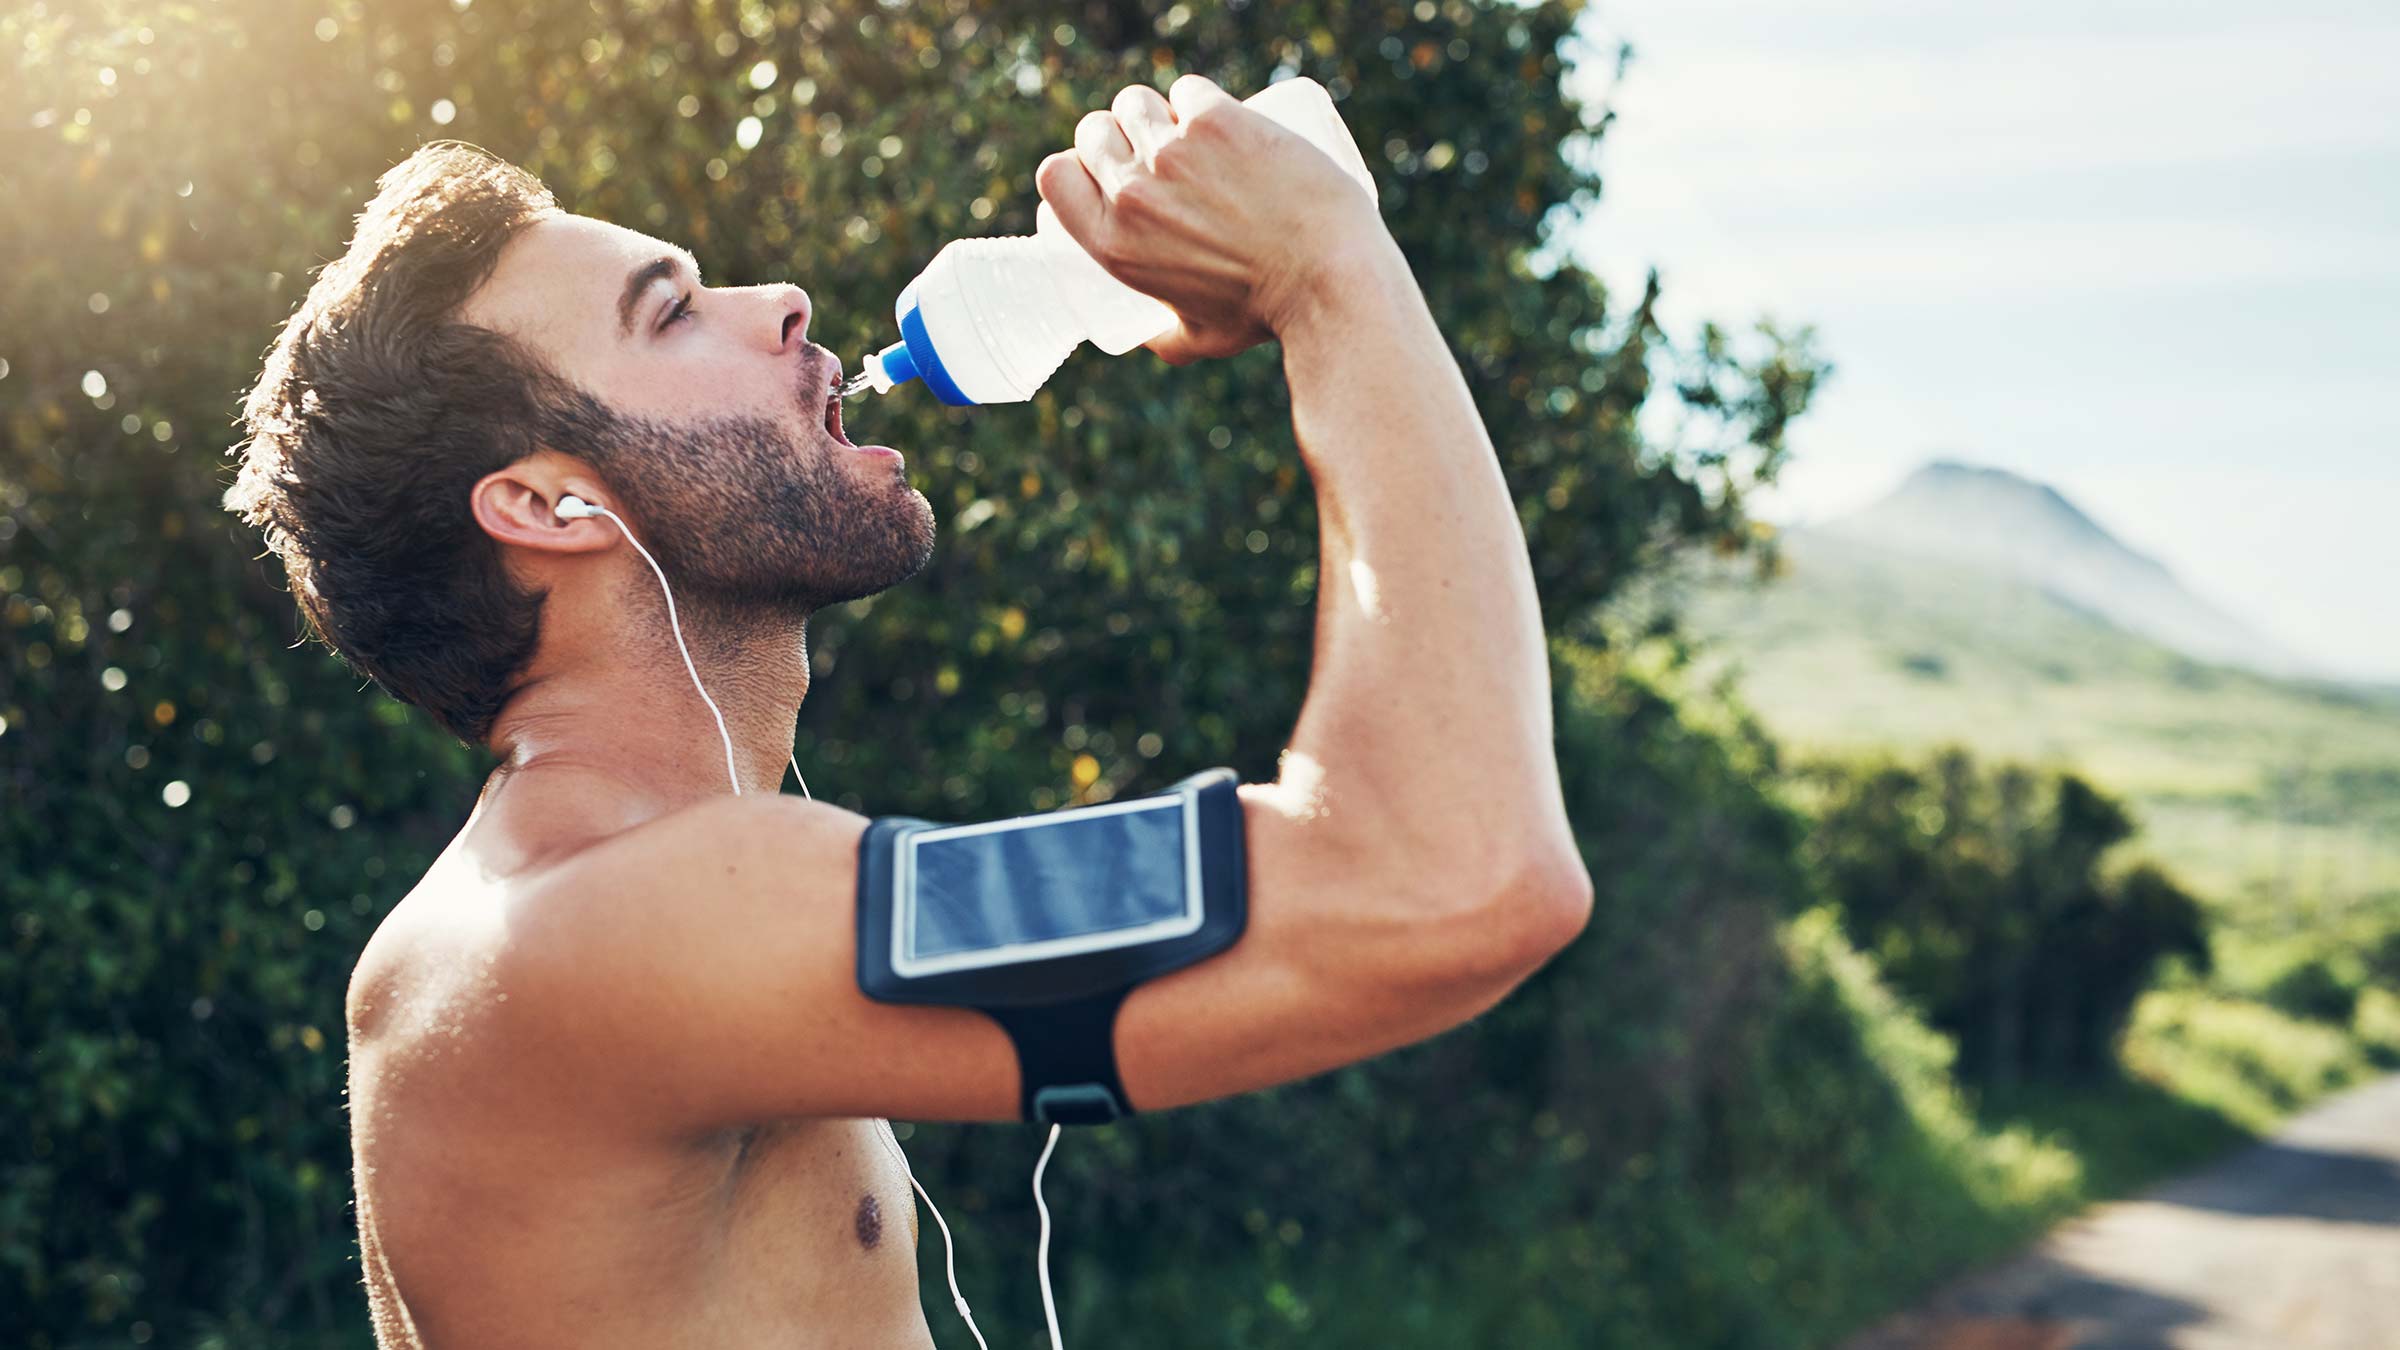 When do you really need to add hydration tablets or other electrolytes to your exercise?